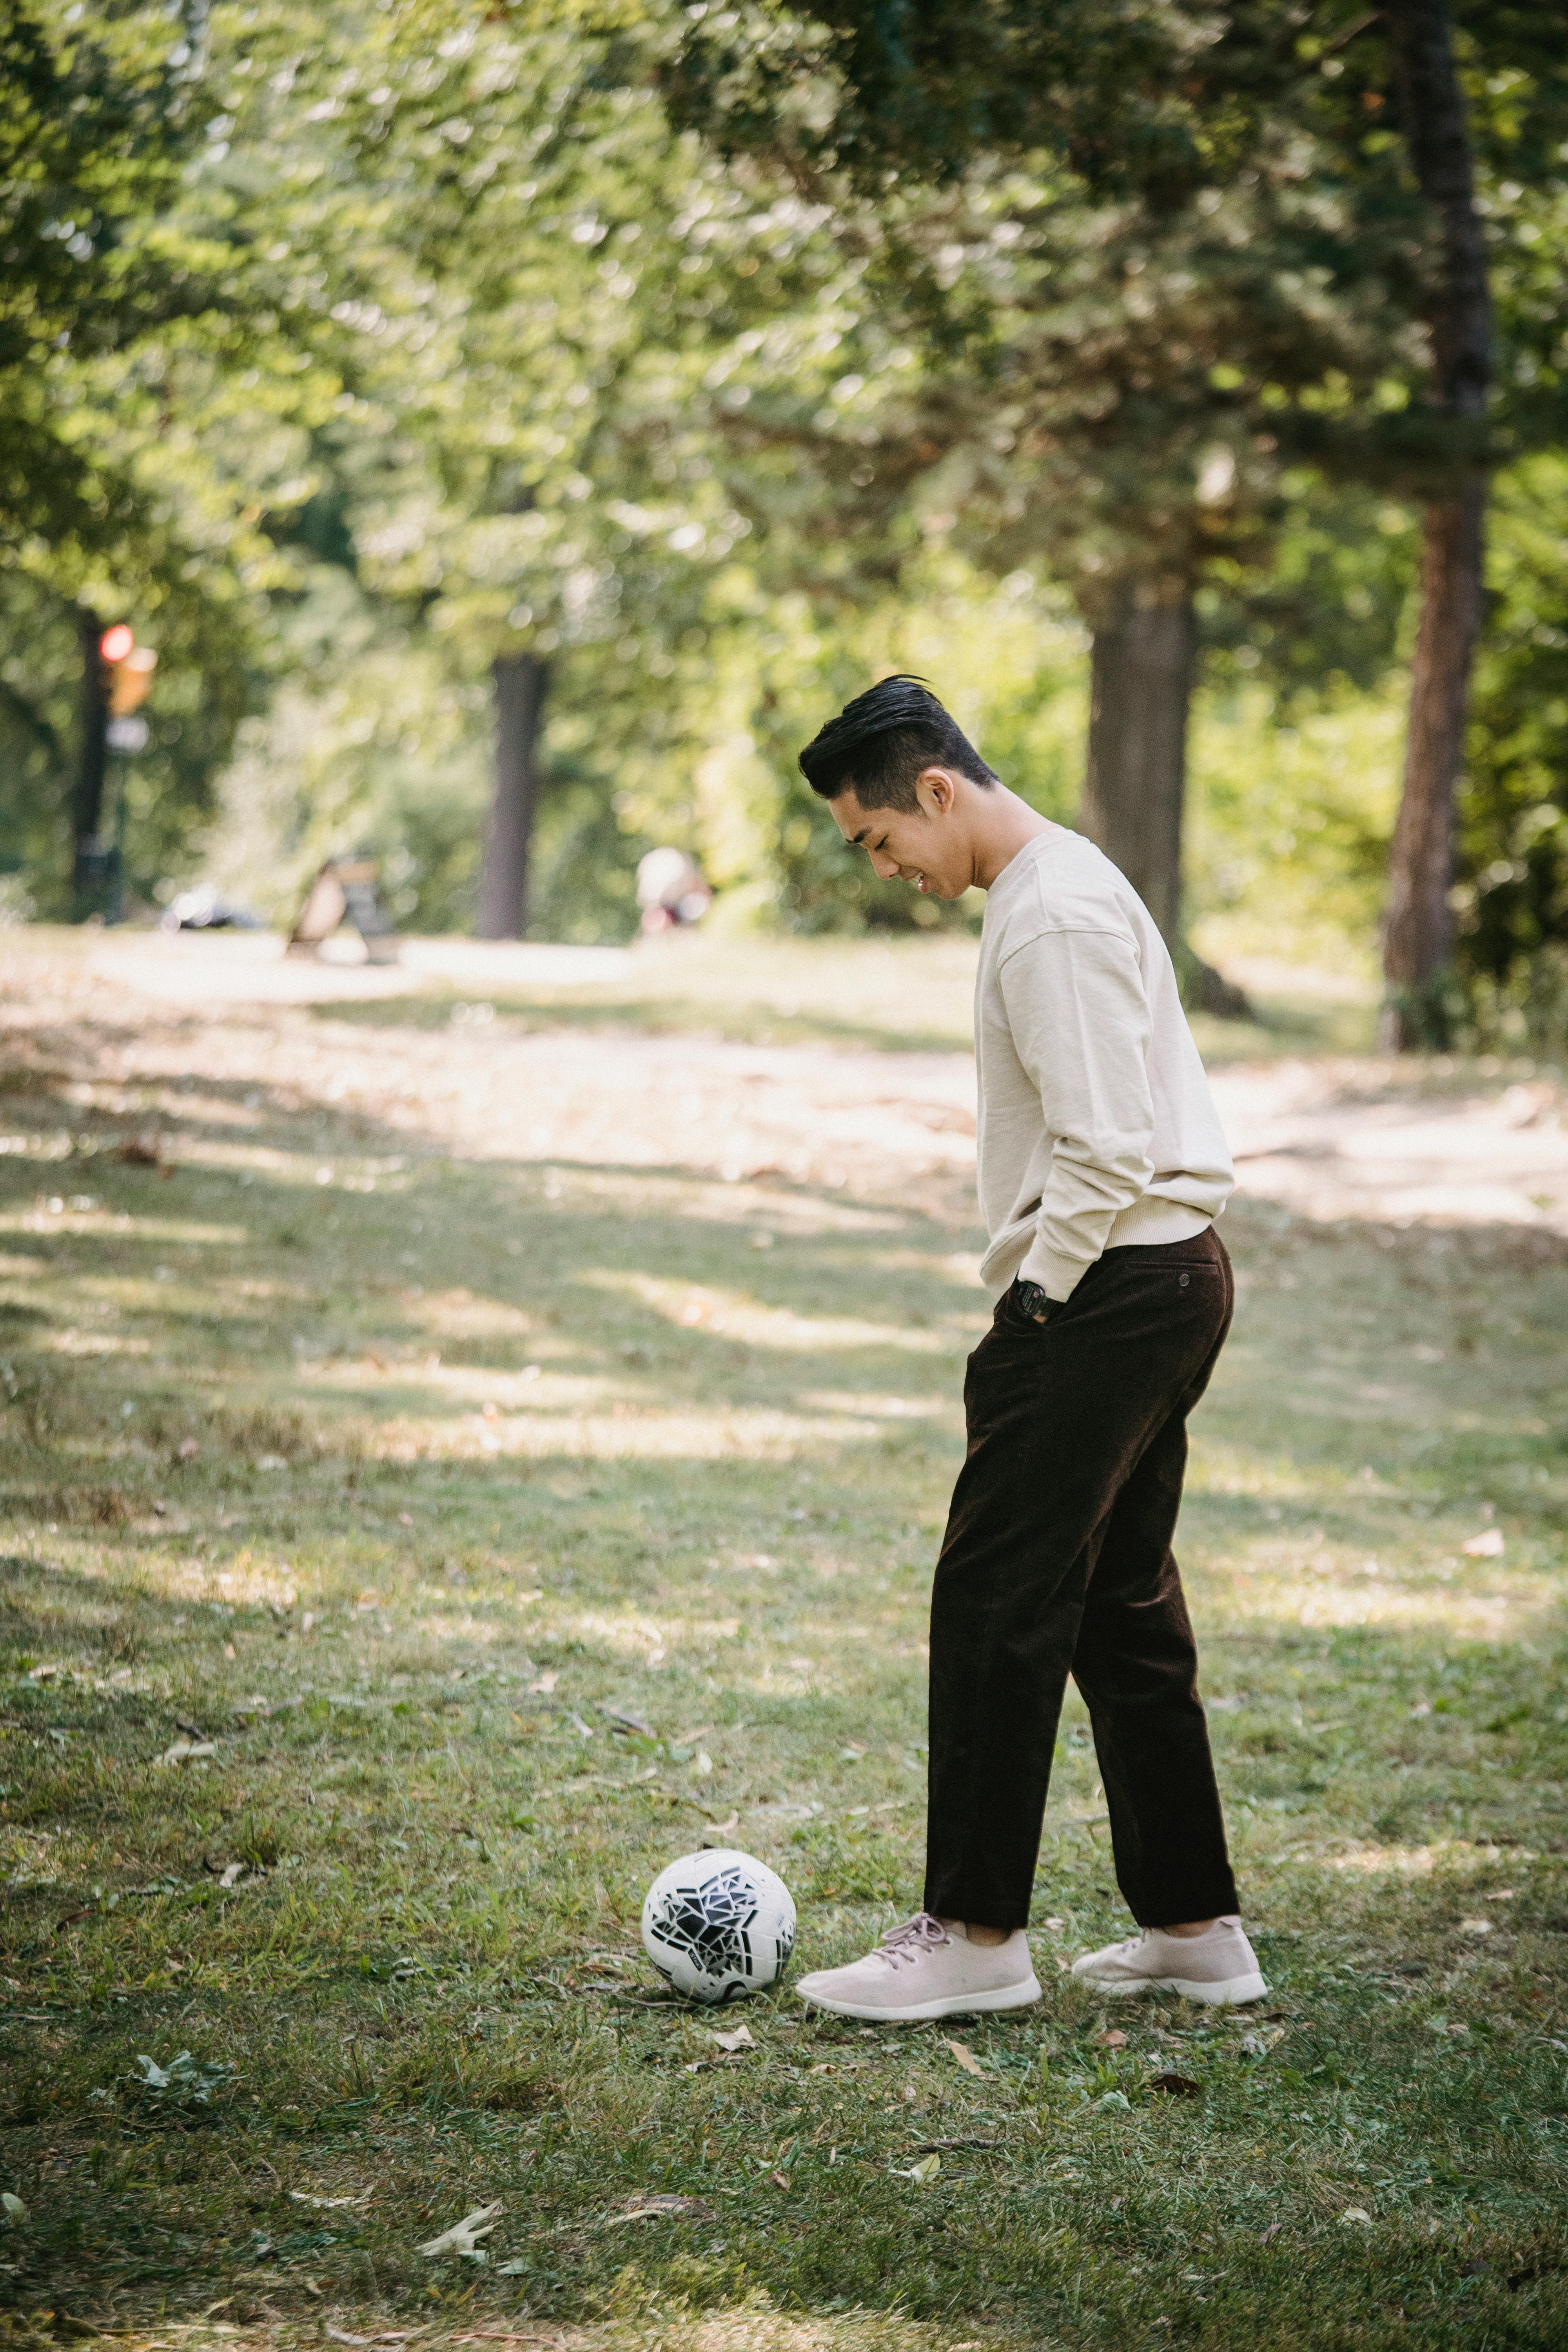 cheerful ethnic man playing with soccer ball in park